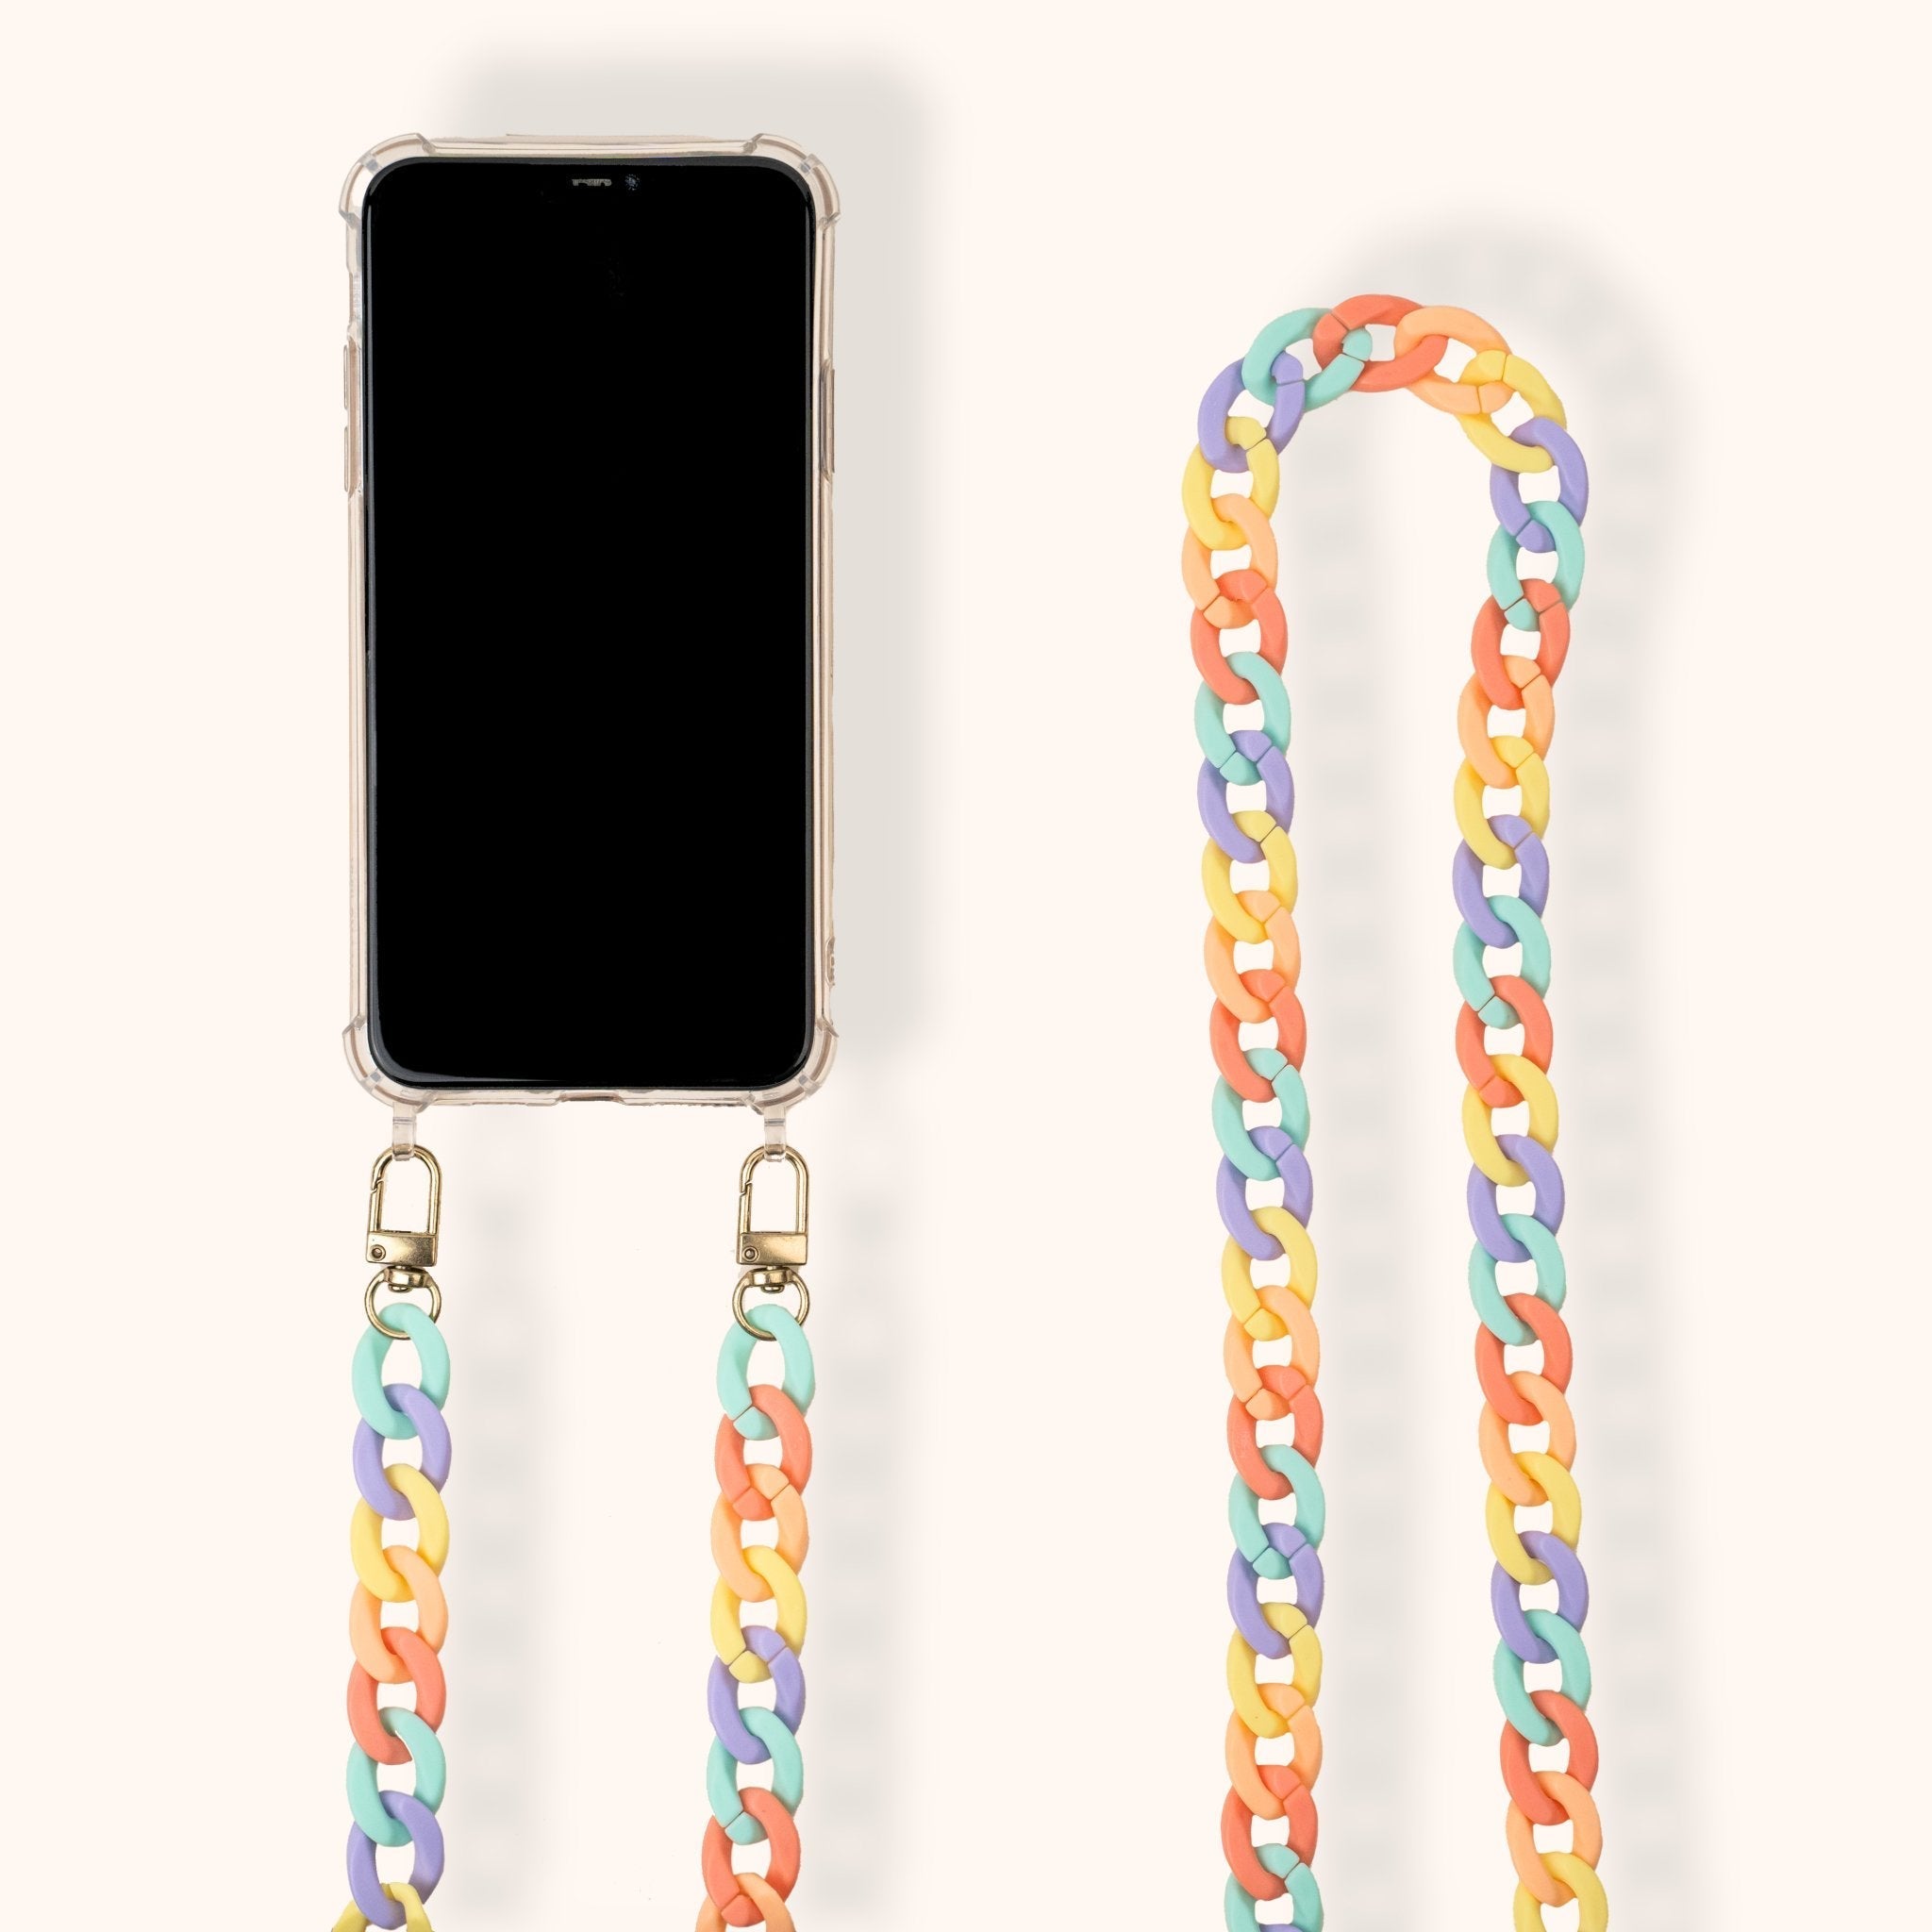 Iphone Strap Case "Lily rainbow" - House Of Case